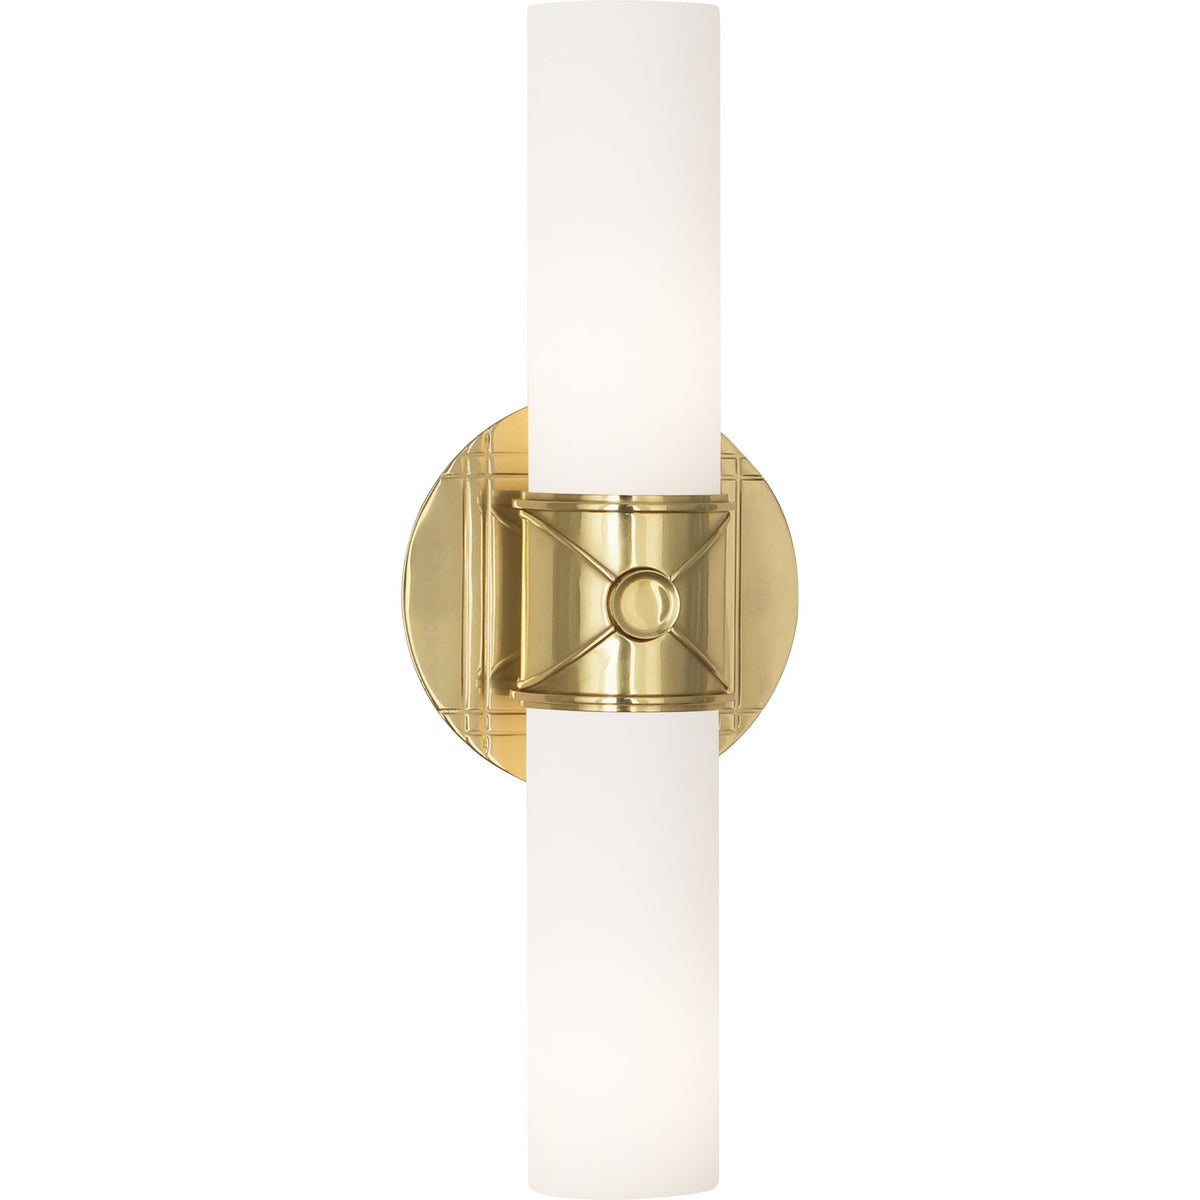 Jonathan Adler Maxime Wall Sconce (Double) by Robert Abbey